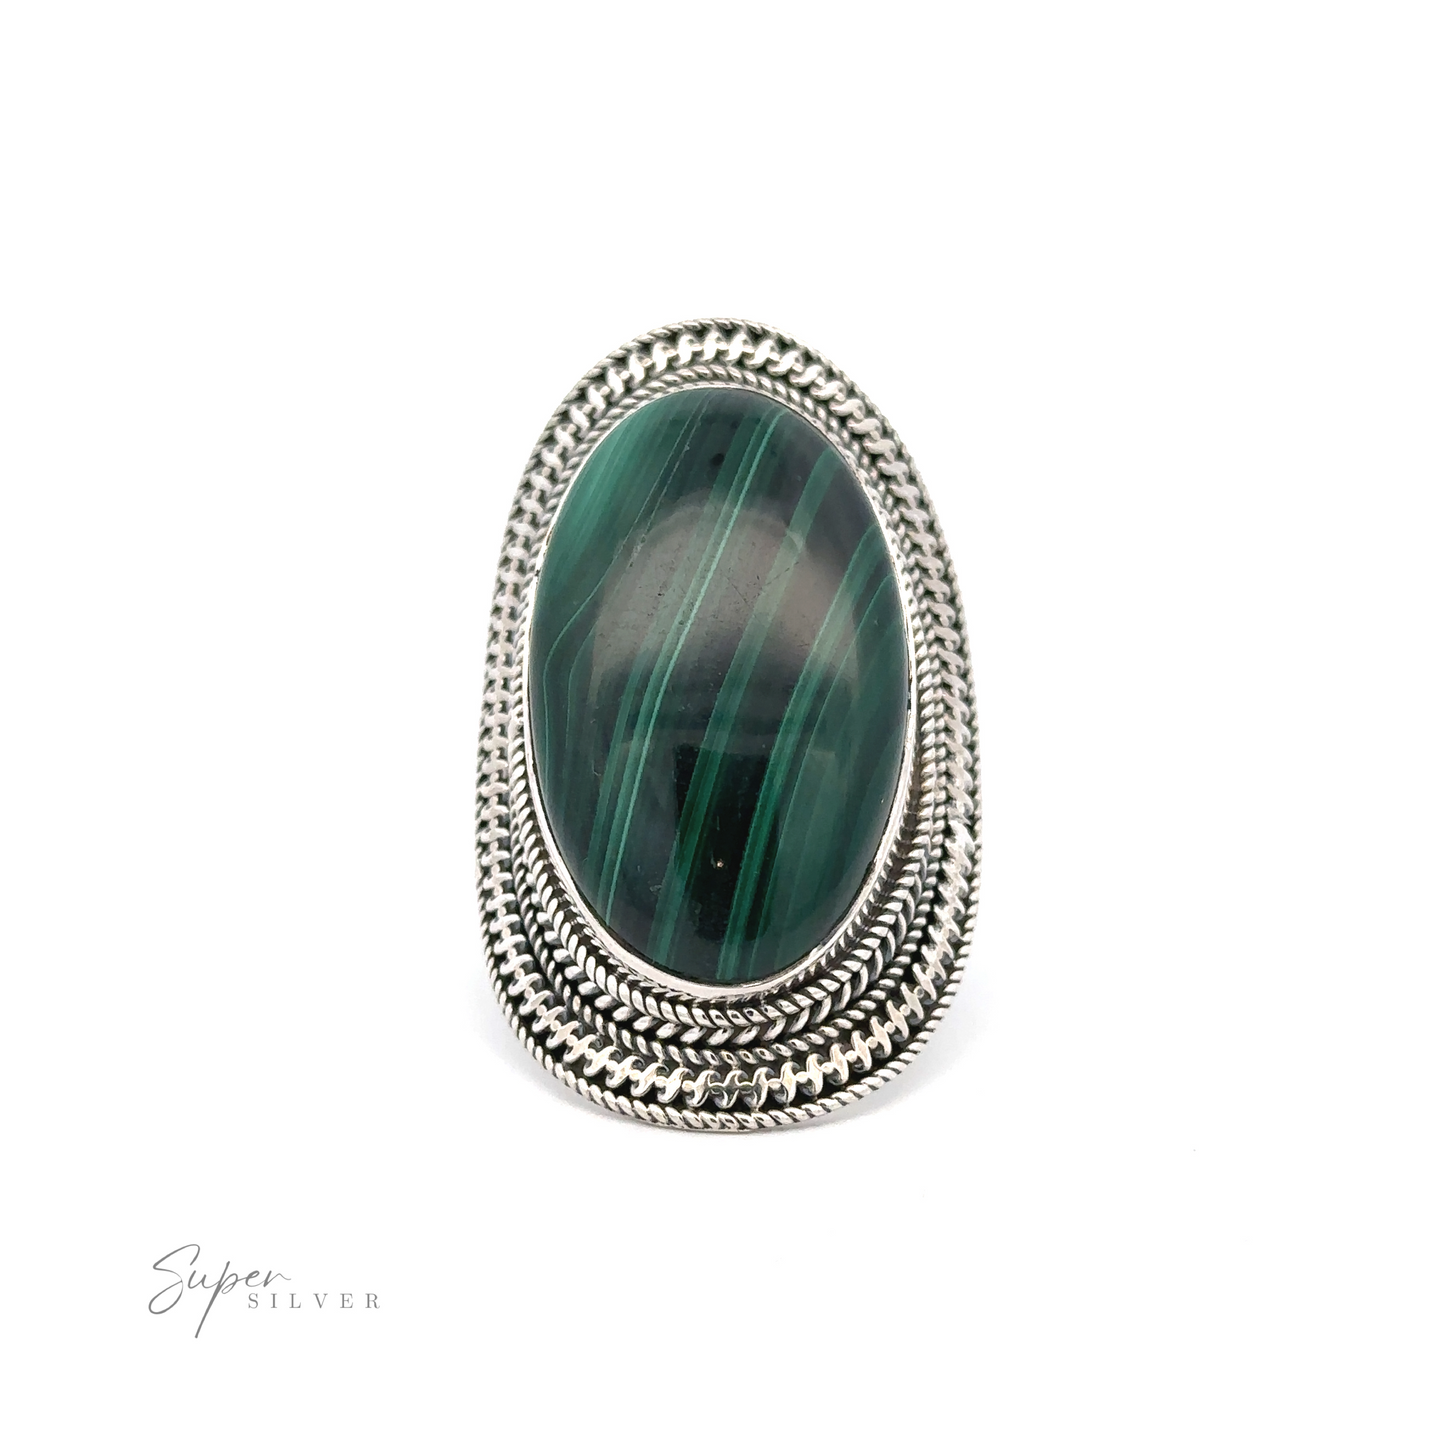 
                  
                    A Large Oval Shield Gemstone Ring featuring a large, oval green gemstone with dark green streaks set in an ornate, braided silver band design. The background is white with "Super Silver" inscribed at the bottom left, giving it a touch of bohemian flair.
                  
                